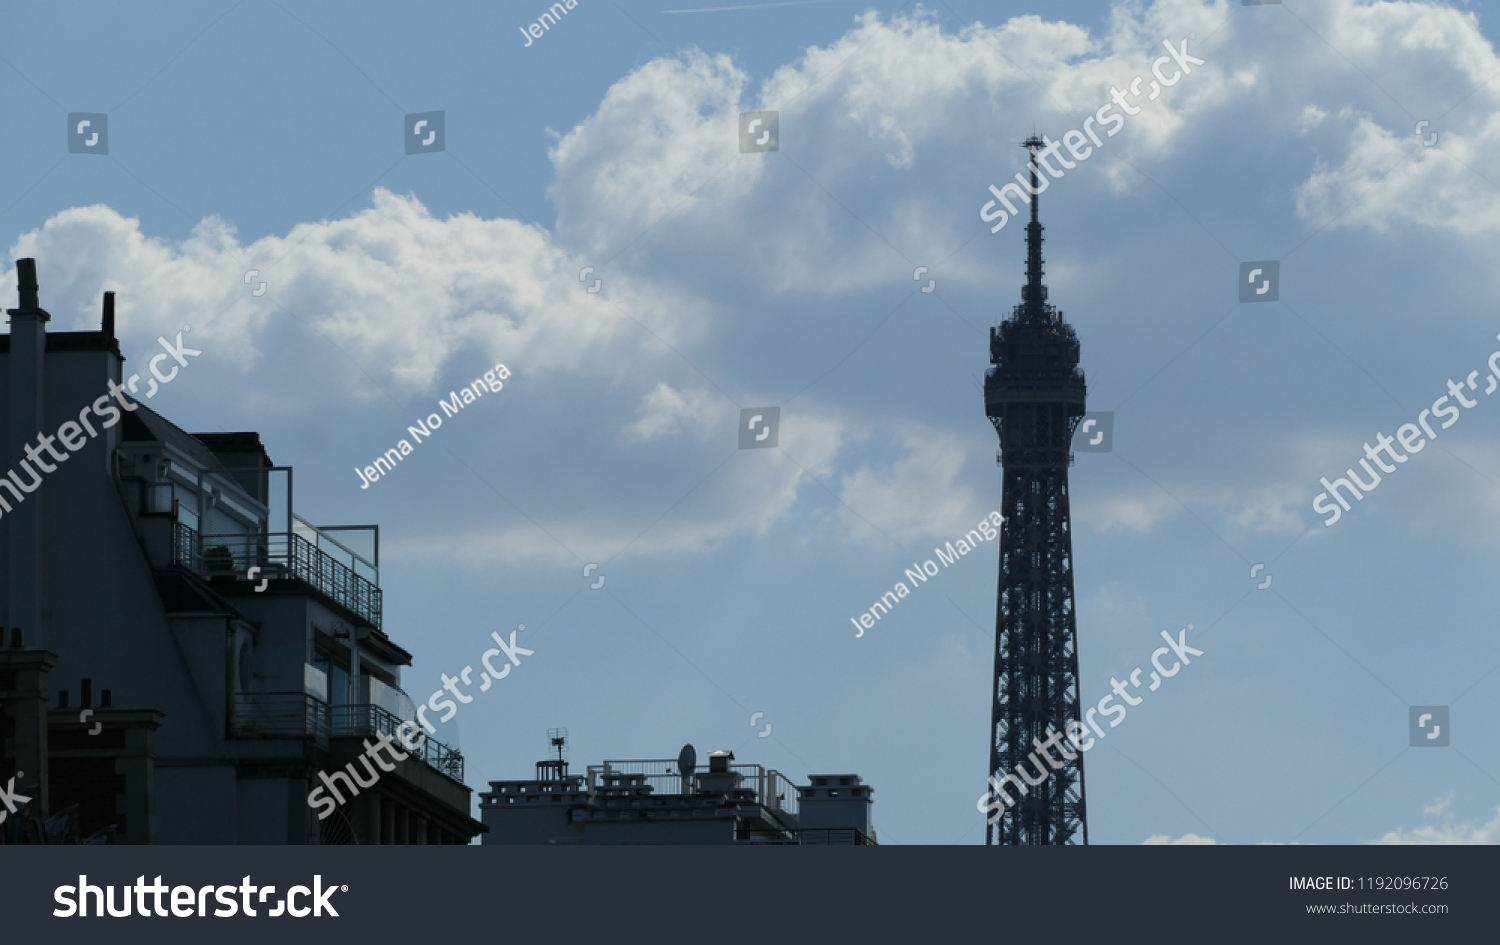 Eiffel tower and building  #1192096726